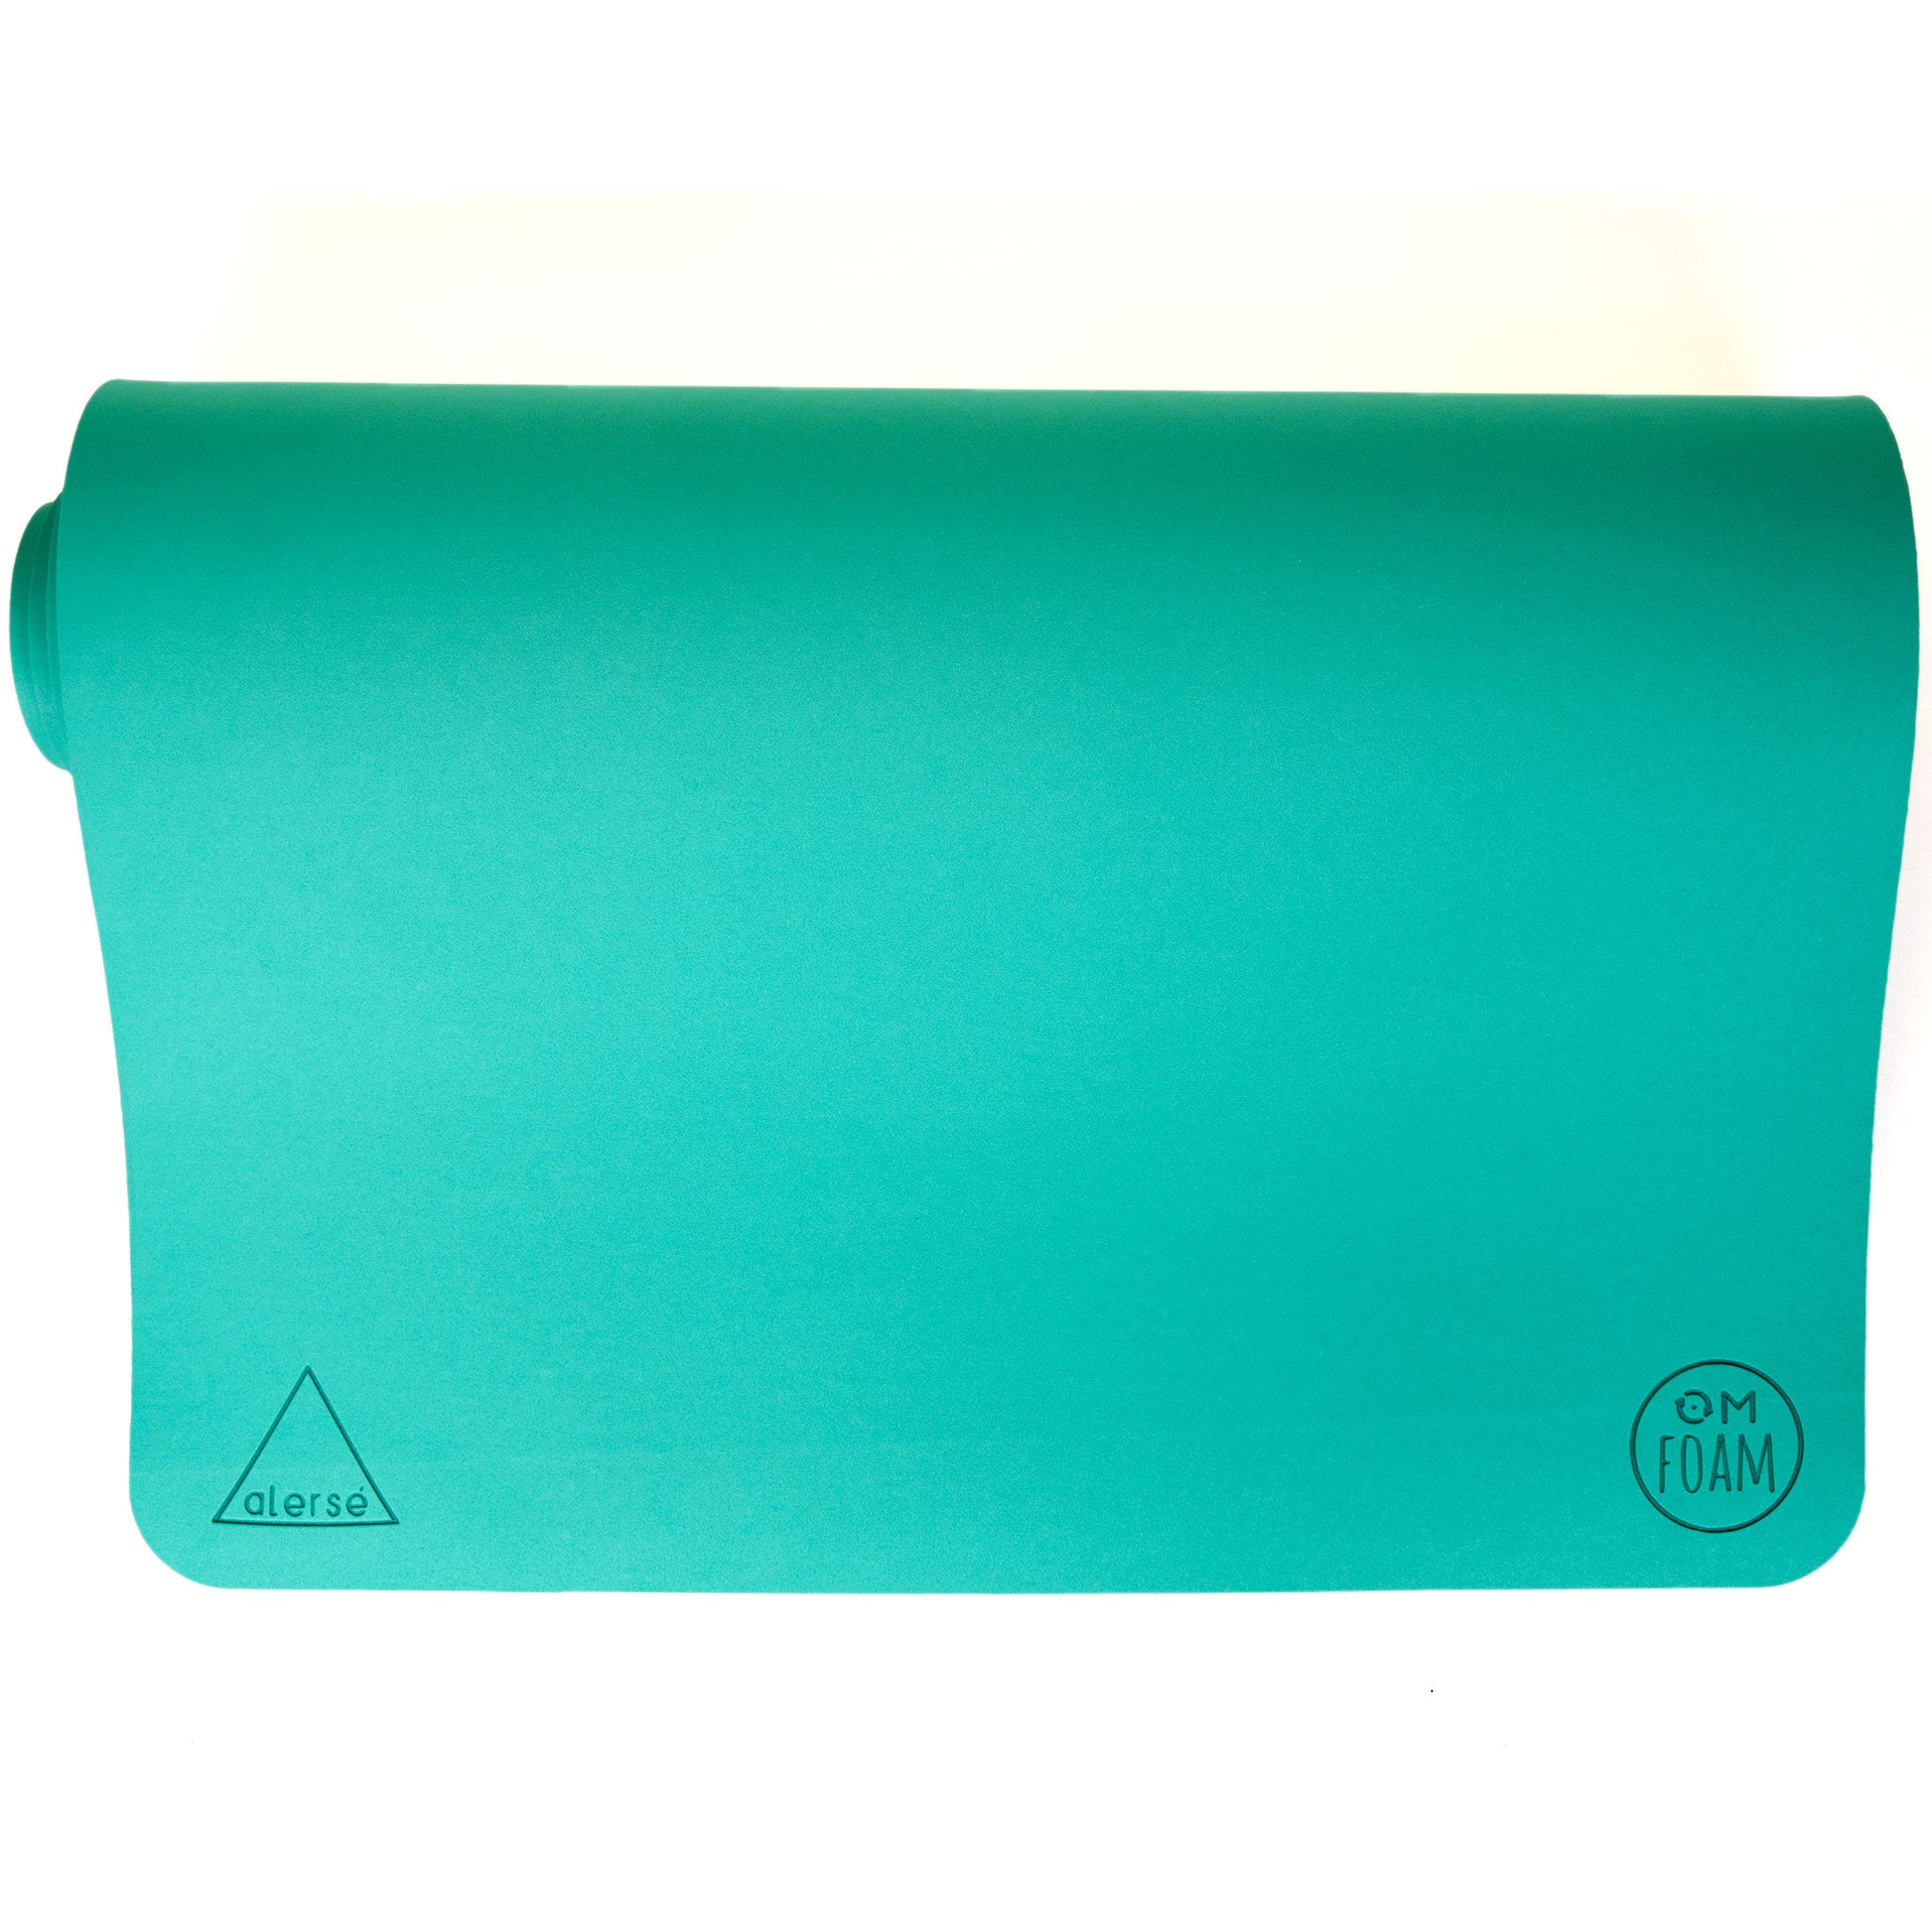 6mm Tolum Yoga Mat made from 60% recycled plastic - Alerse